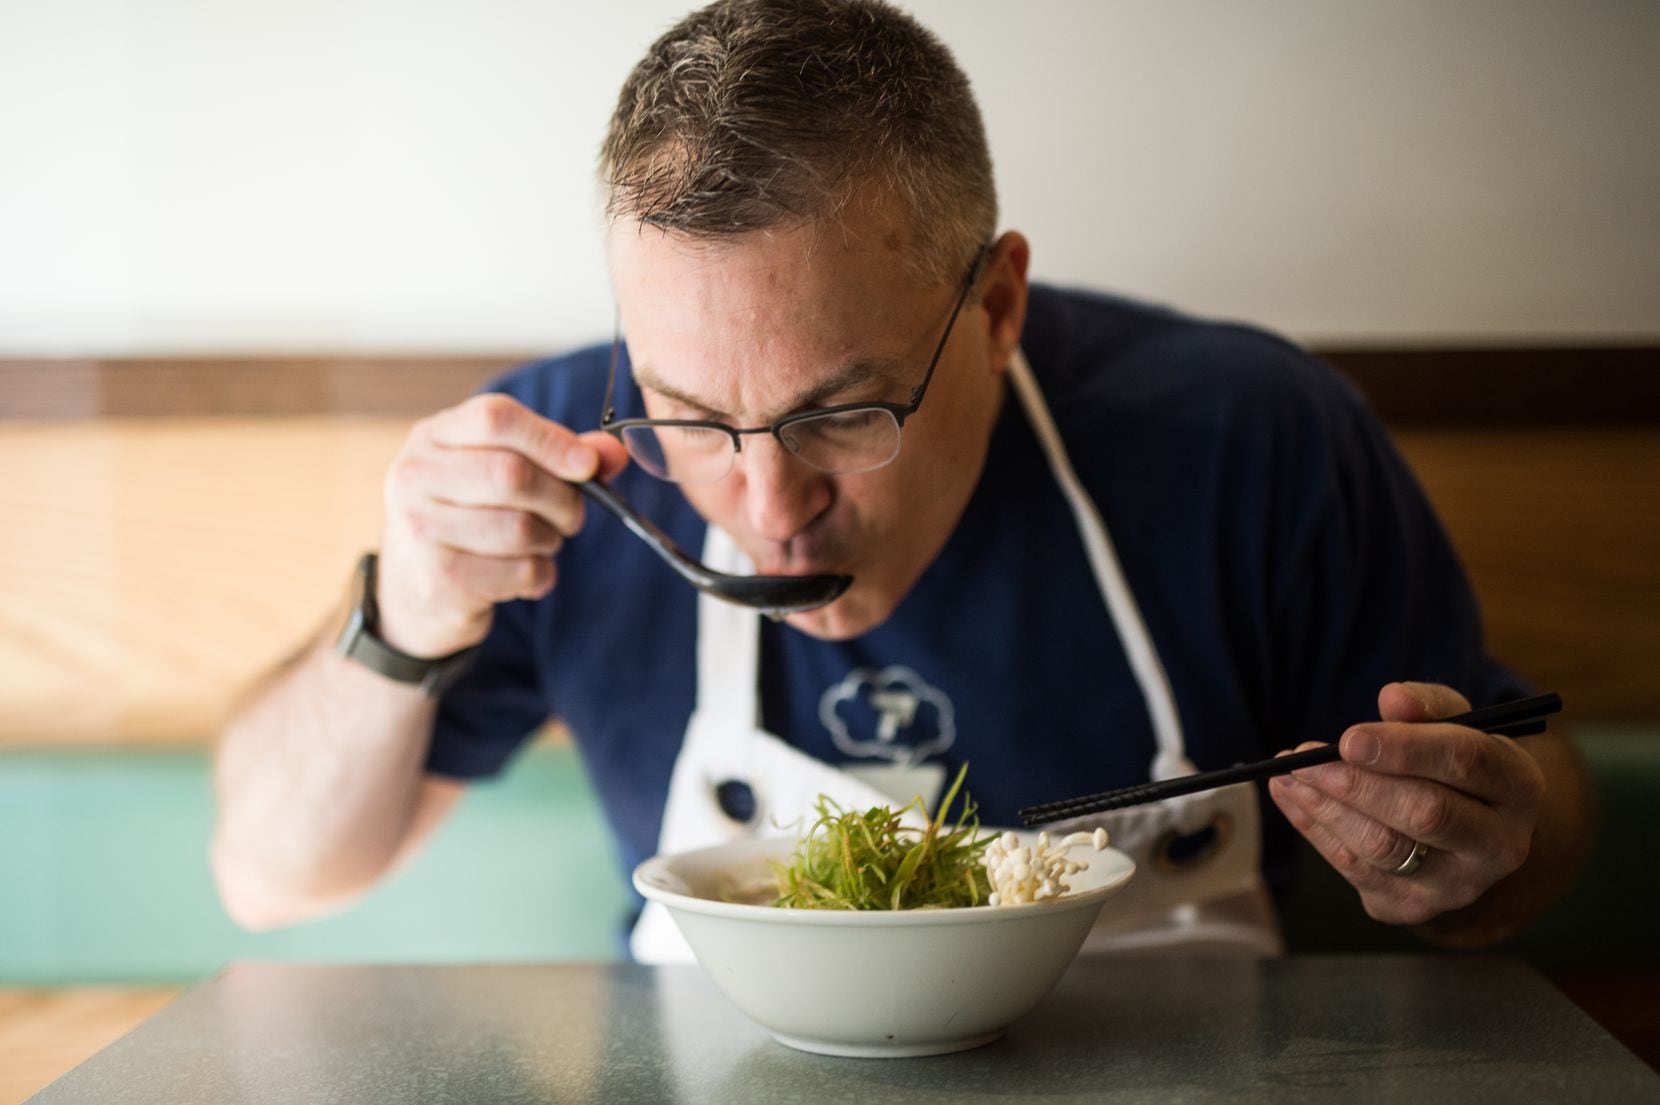 Chef Ivan Orkin opened his first ramen shop in Tokyo. "This move seemed destined for failure in a country where ramen enjoys a cult-like status," says his restaurant's website. But the concept worked, and customers lined up to eat his food. Orkin now lives in New York City and was featured on "Chef's Table" on Netflix in 2017. He operates one Ivan Ramen shop; one closed mid-pandemic. 